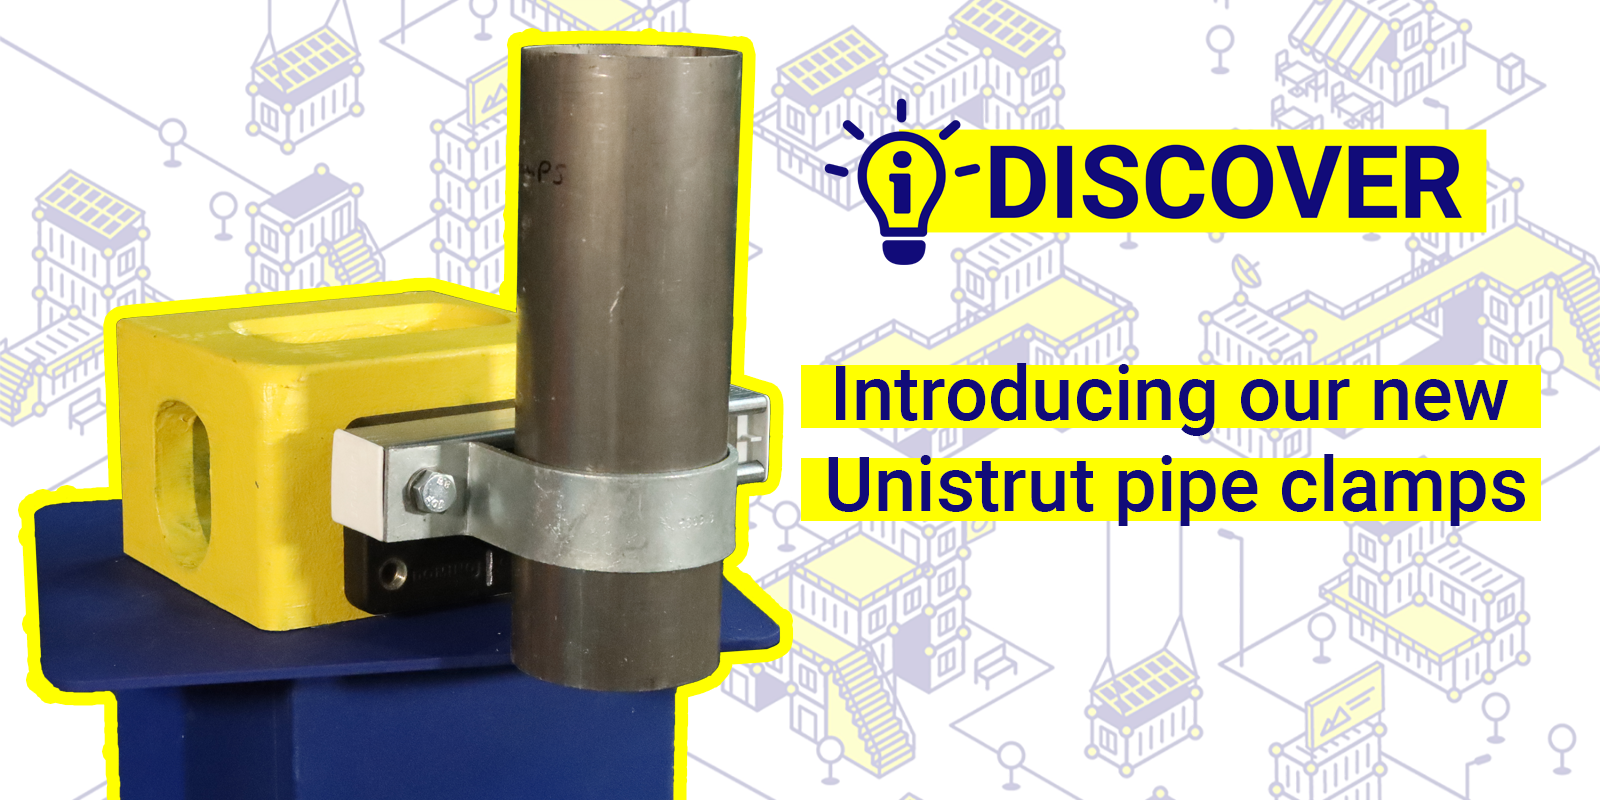 Introducing our new Unistrut pipe clamps